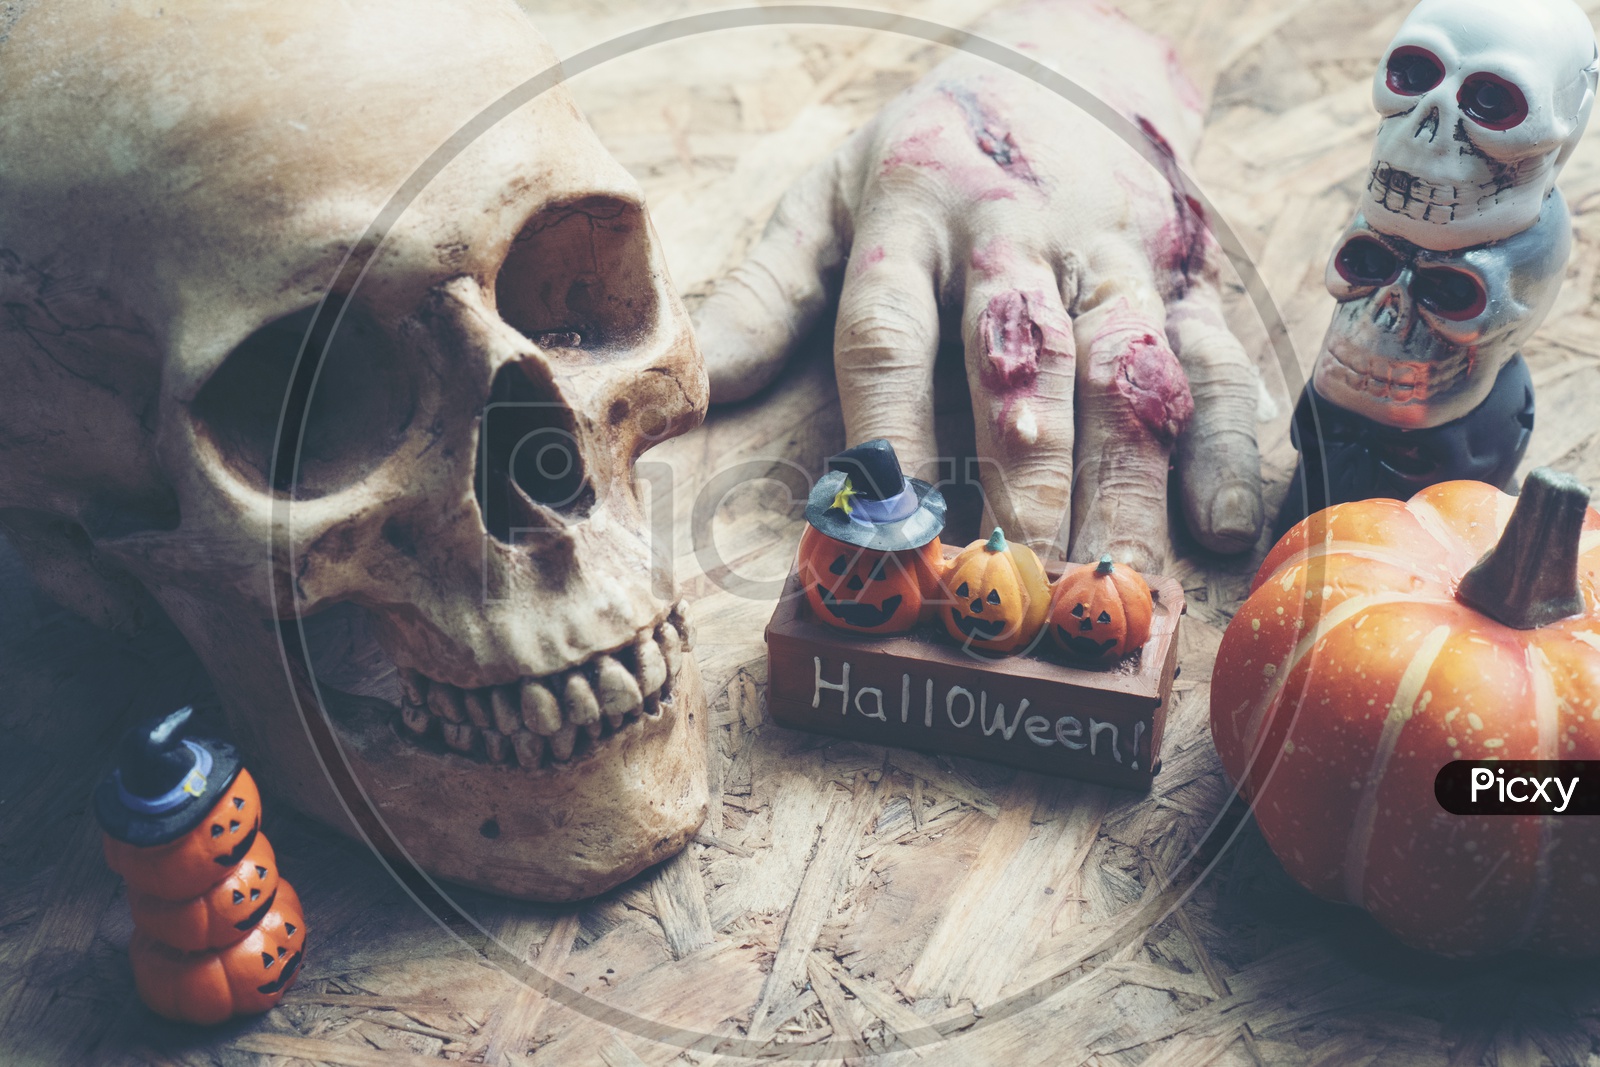 Artistic Background For Halloween  With Skull And  Pumpkin  With Vintage  Filter